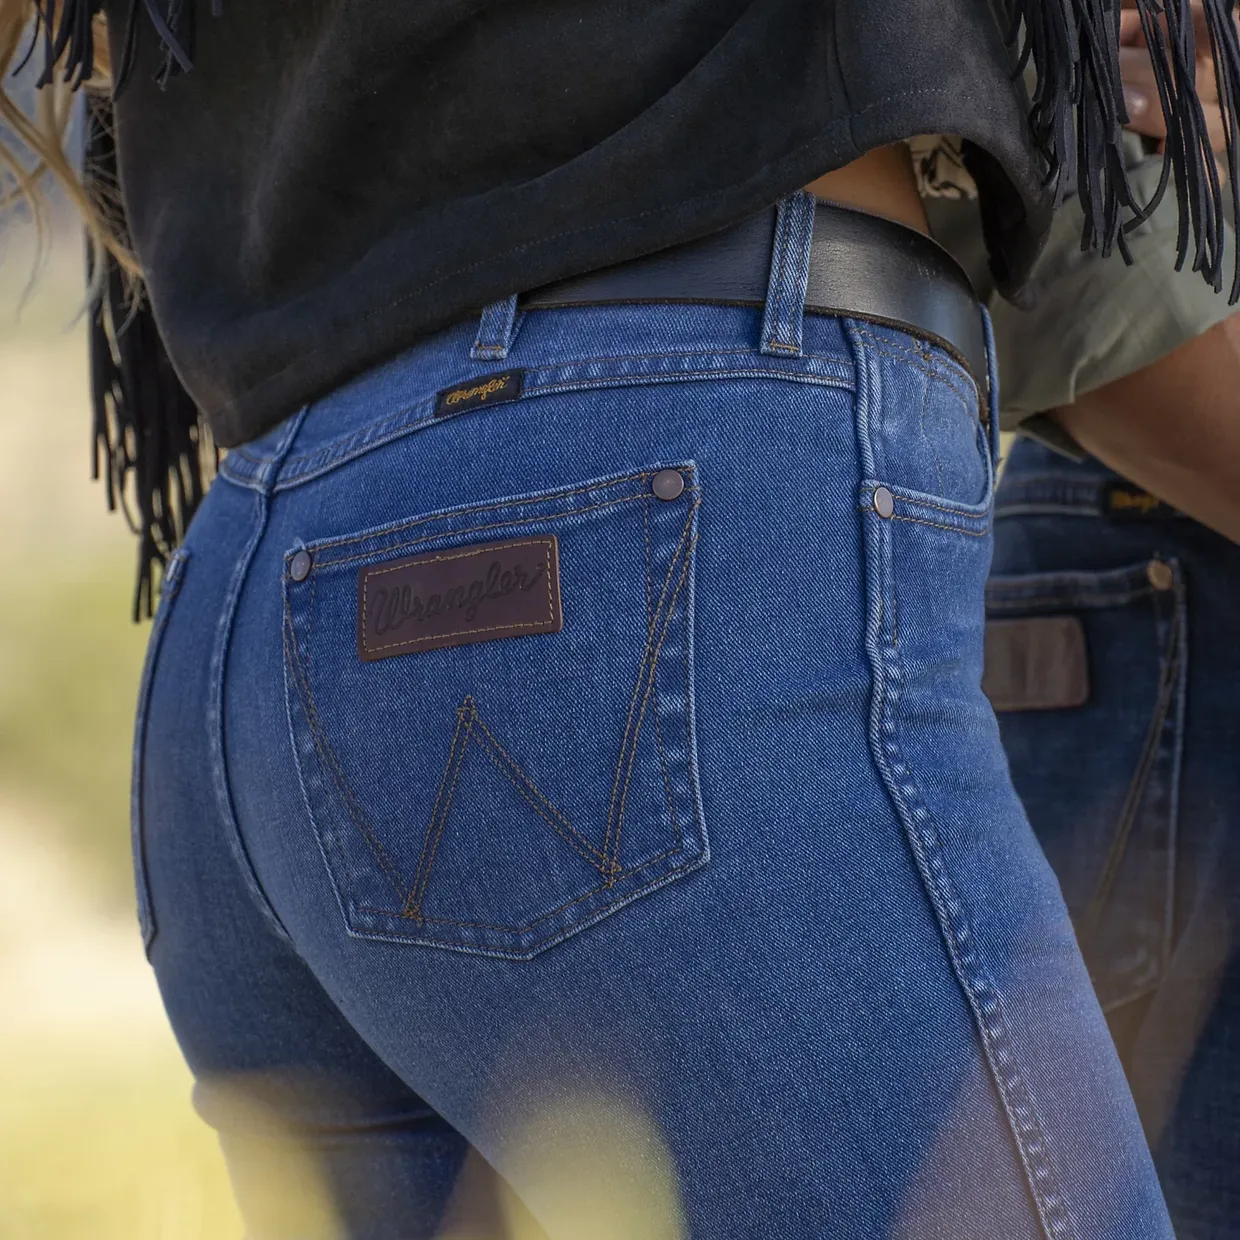 A person wearing blue denim Wrangler jeans with a branded leather patch on the back pocket.